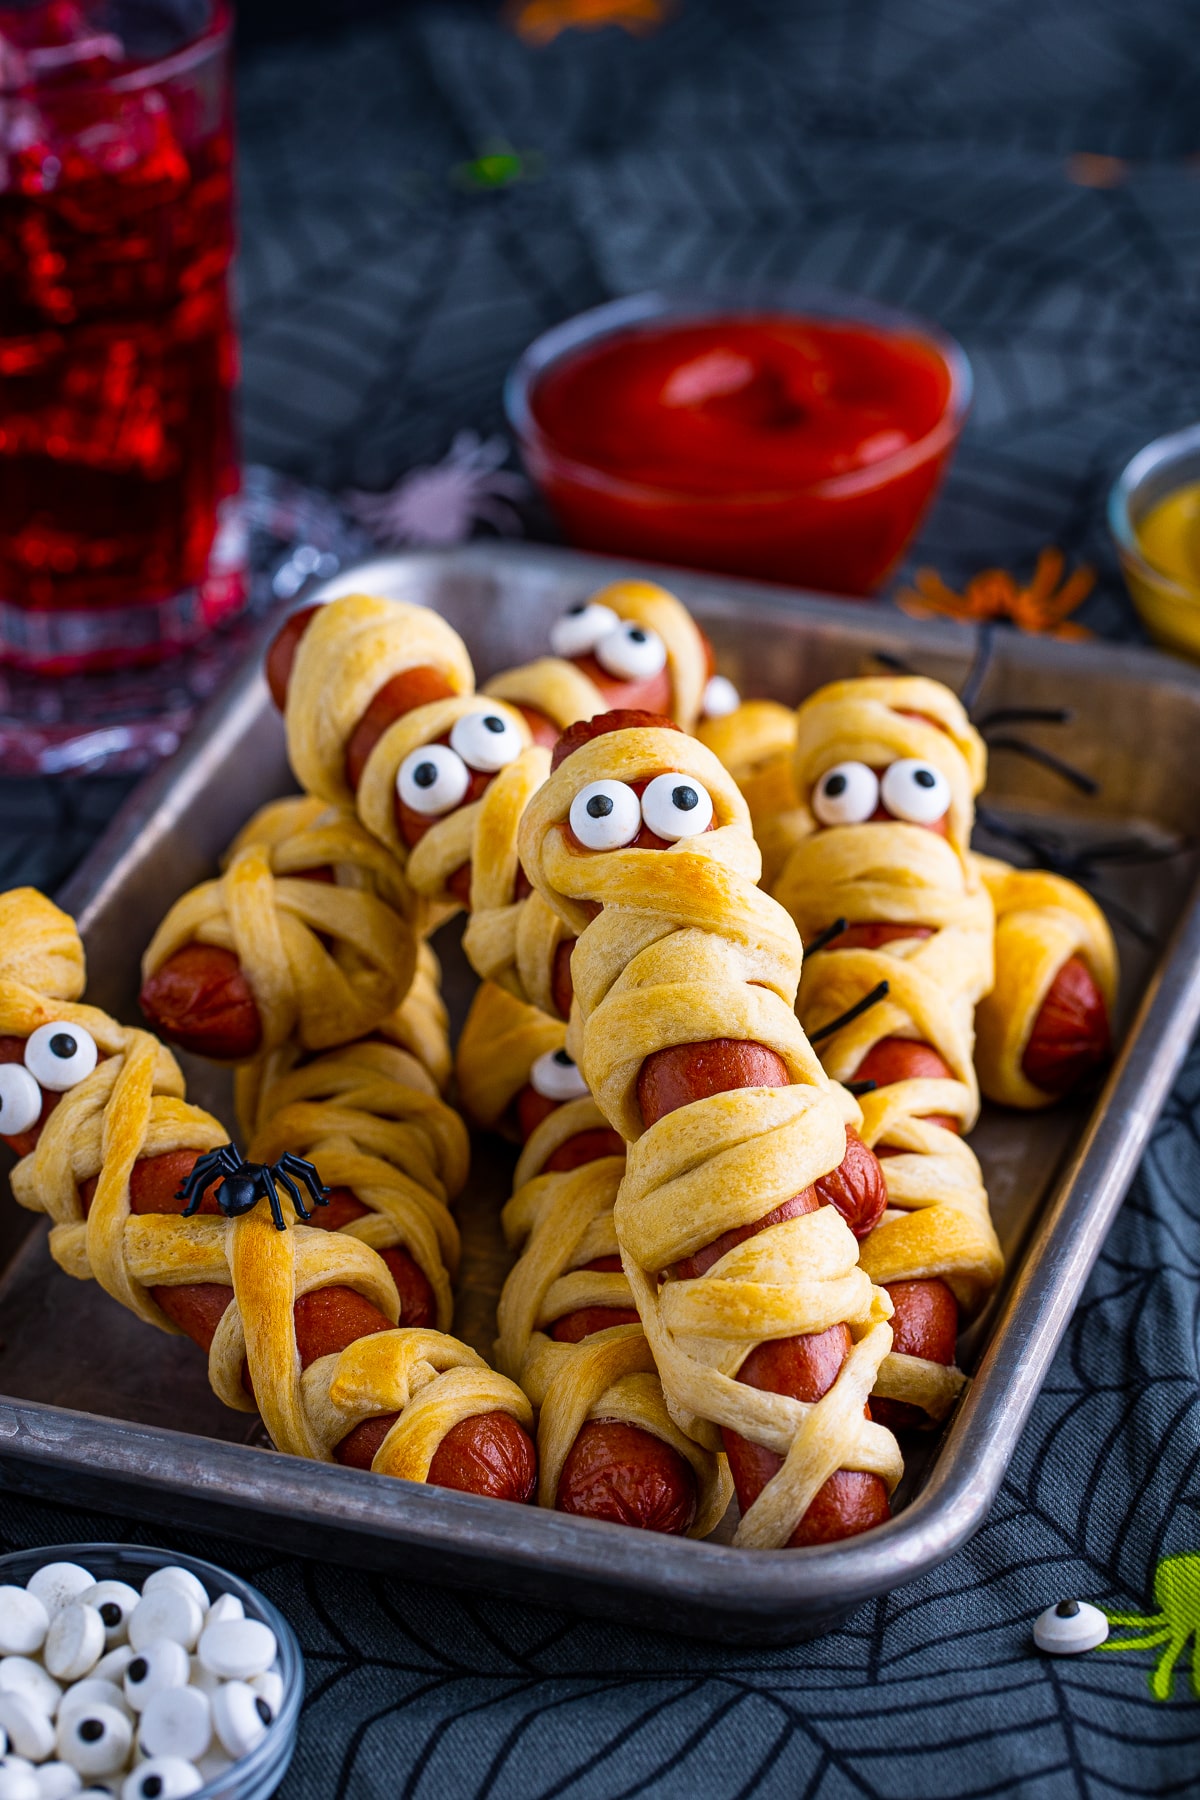 Mummy Dogs on metal tray stacked with ketchup and drink in background.